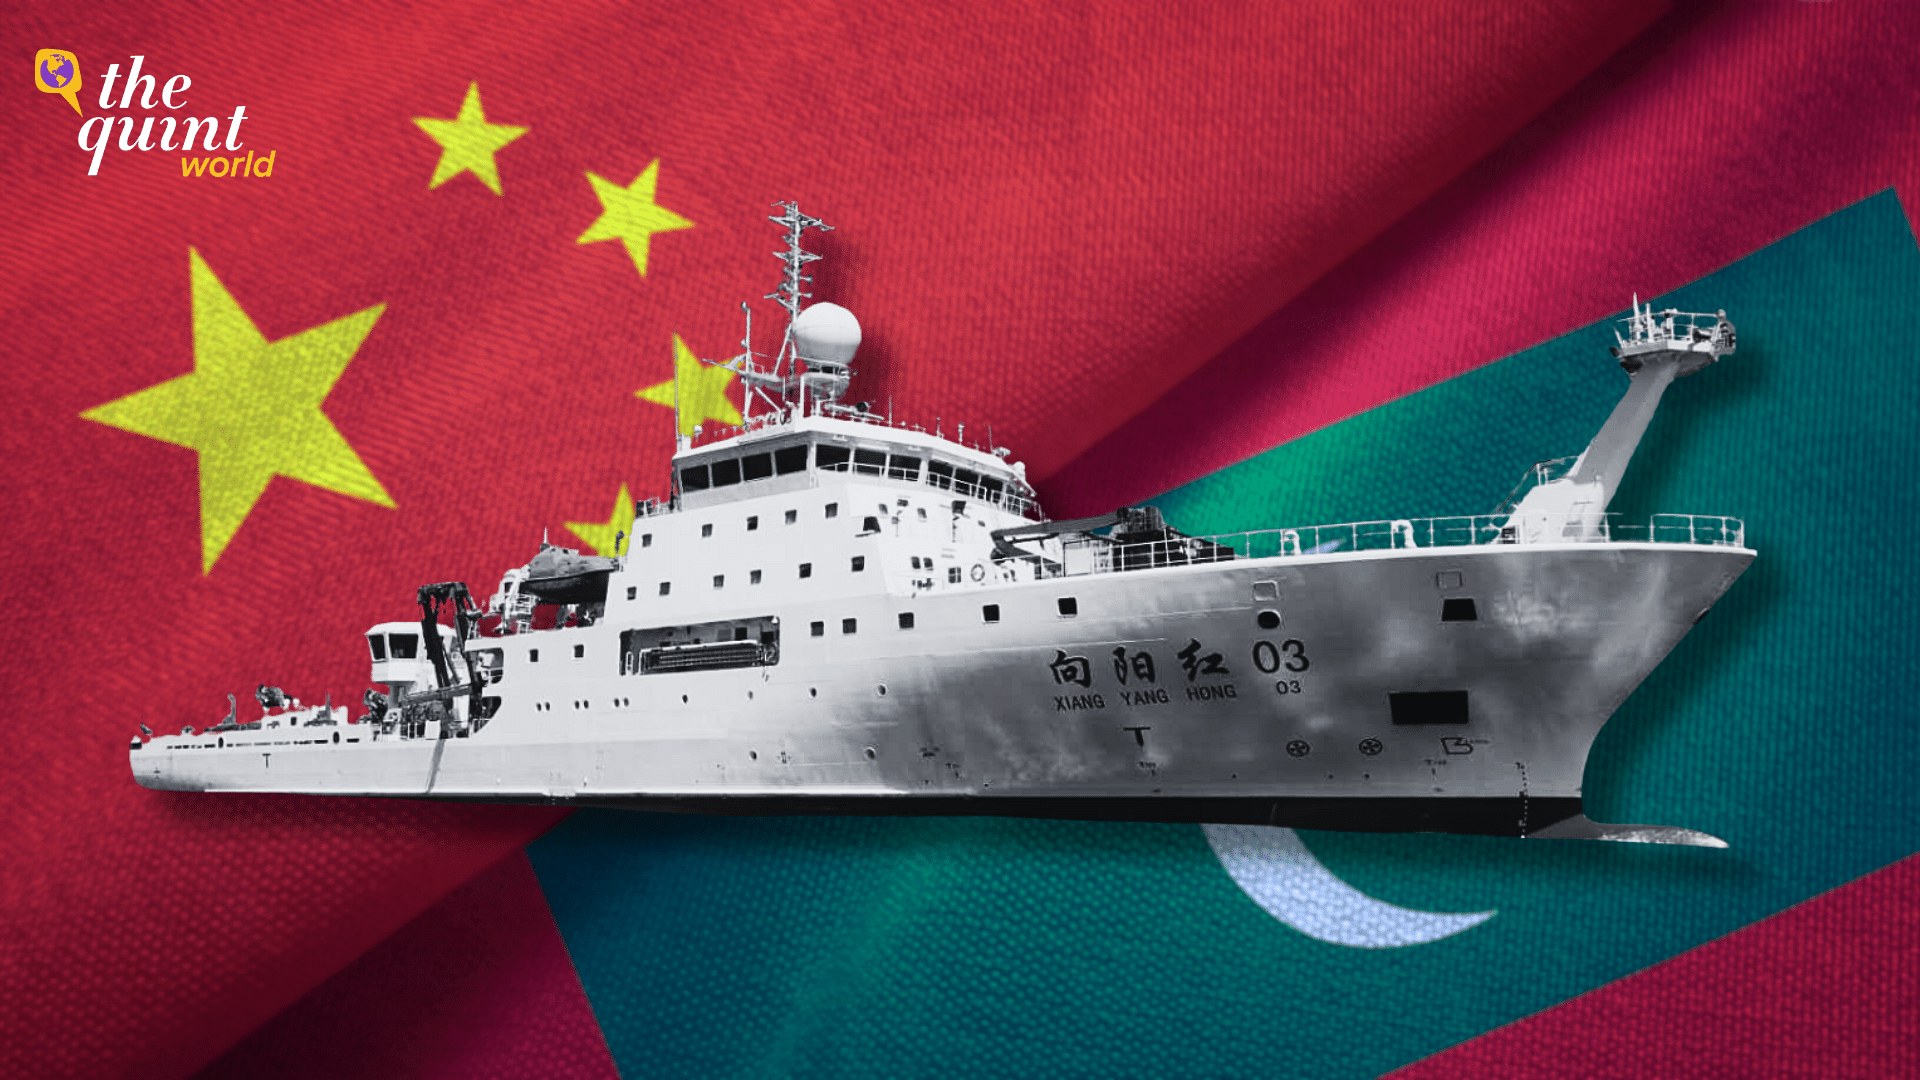 <div class="paragraphs"><p>In a statement on Tuesday, 23 January, the Government of Maldives has claimed that the Chinese research vessel ‘Xiang Yang Hong 3’ will not be conducting research in Maldivian waters, but is scheduled for a port call.</p></div>